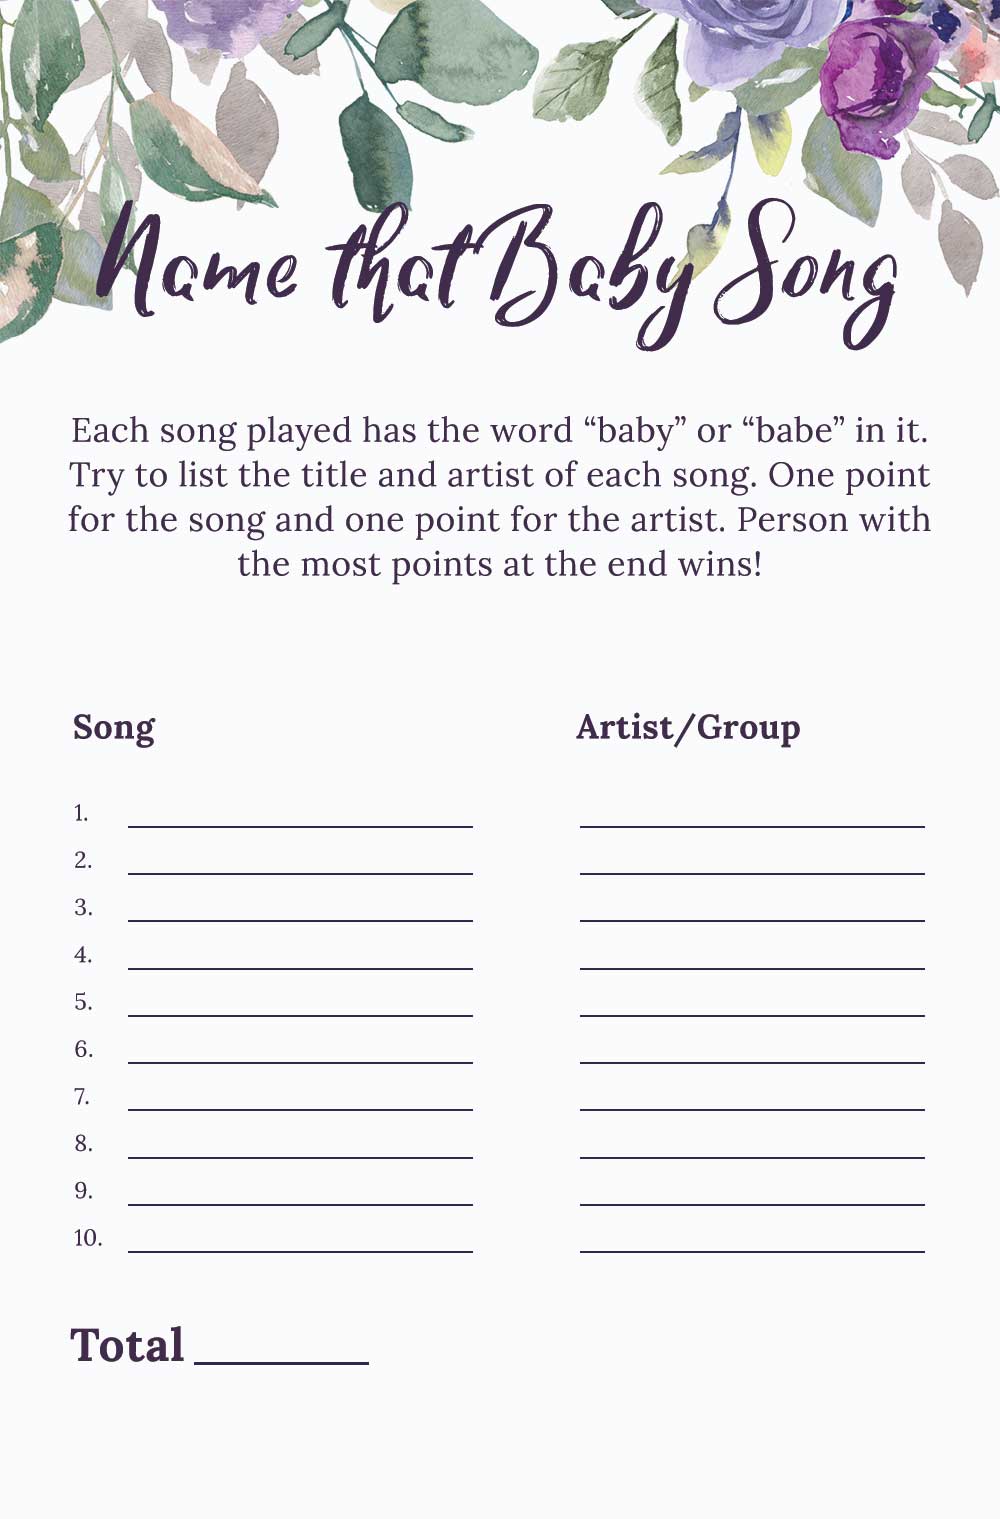 Name that baby song game - Plum Theme